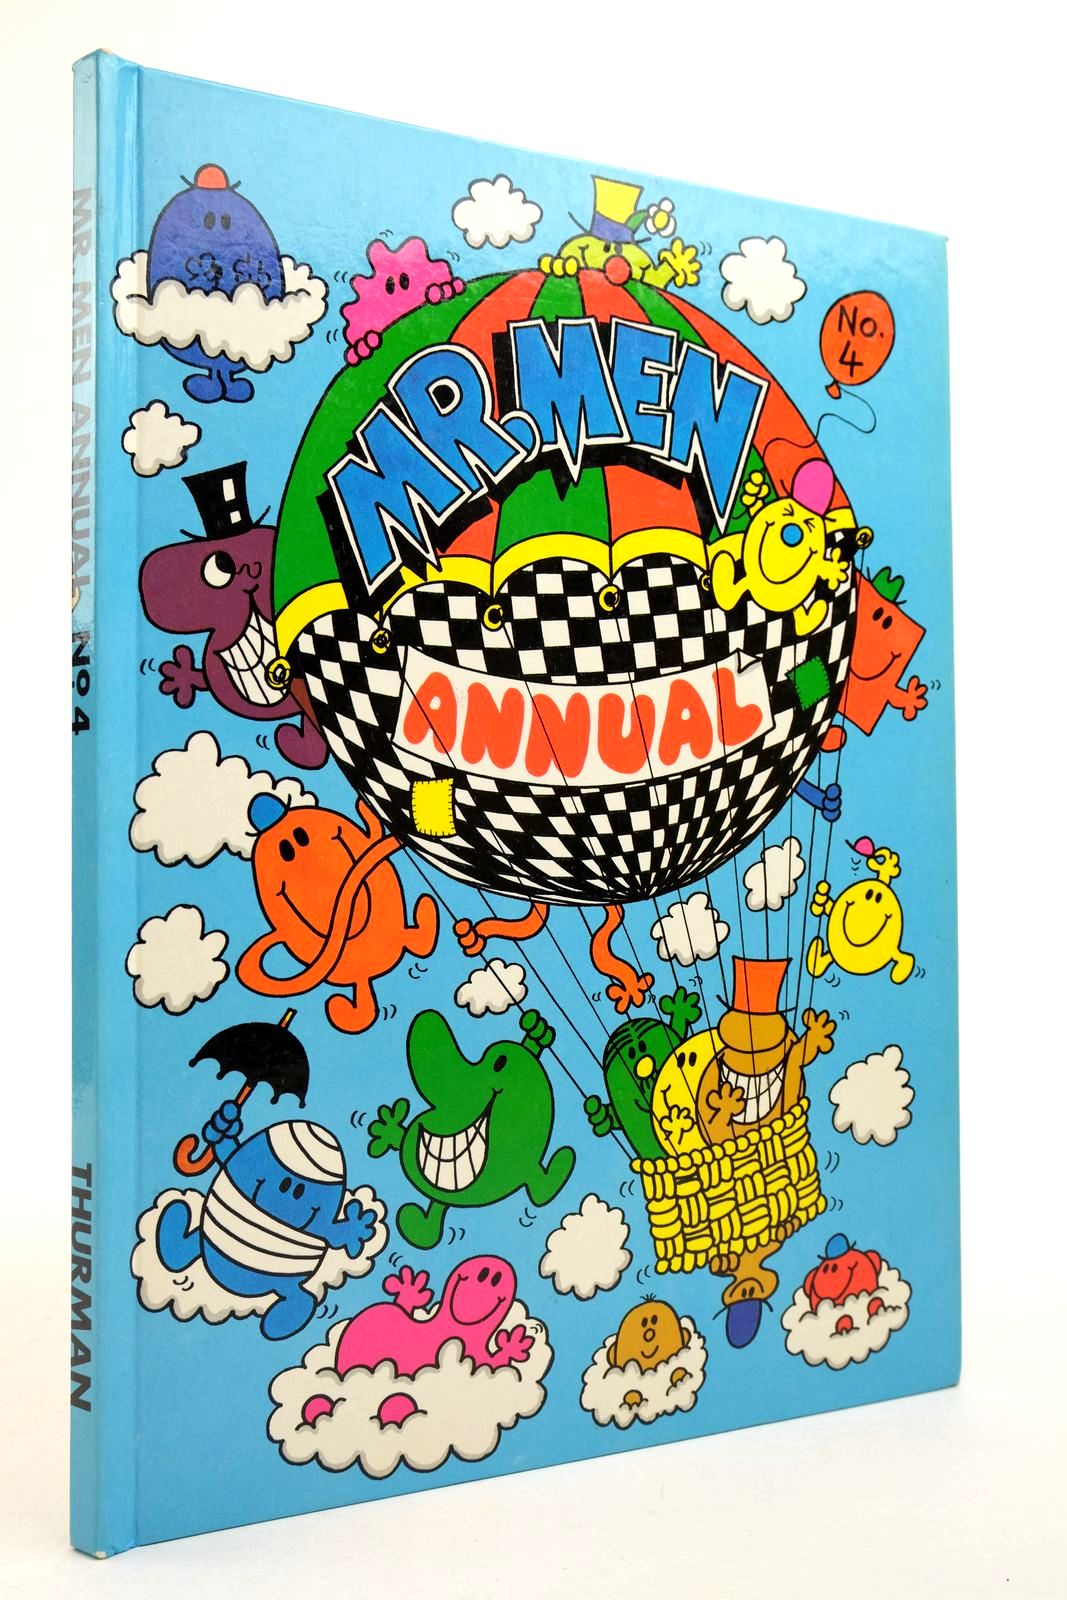 Photo of MR. MEN ANNUAL No. 4 written by Hargreaves, Roger illustrated by Hargreaves, Roger published by Thurman Publishing (STOCK CODE: 2140339)  for sale by Stella & Rose's Books